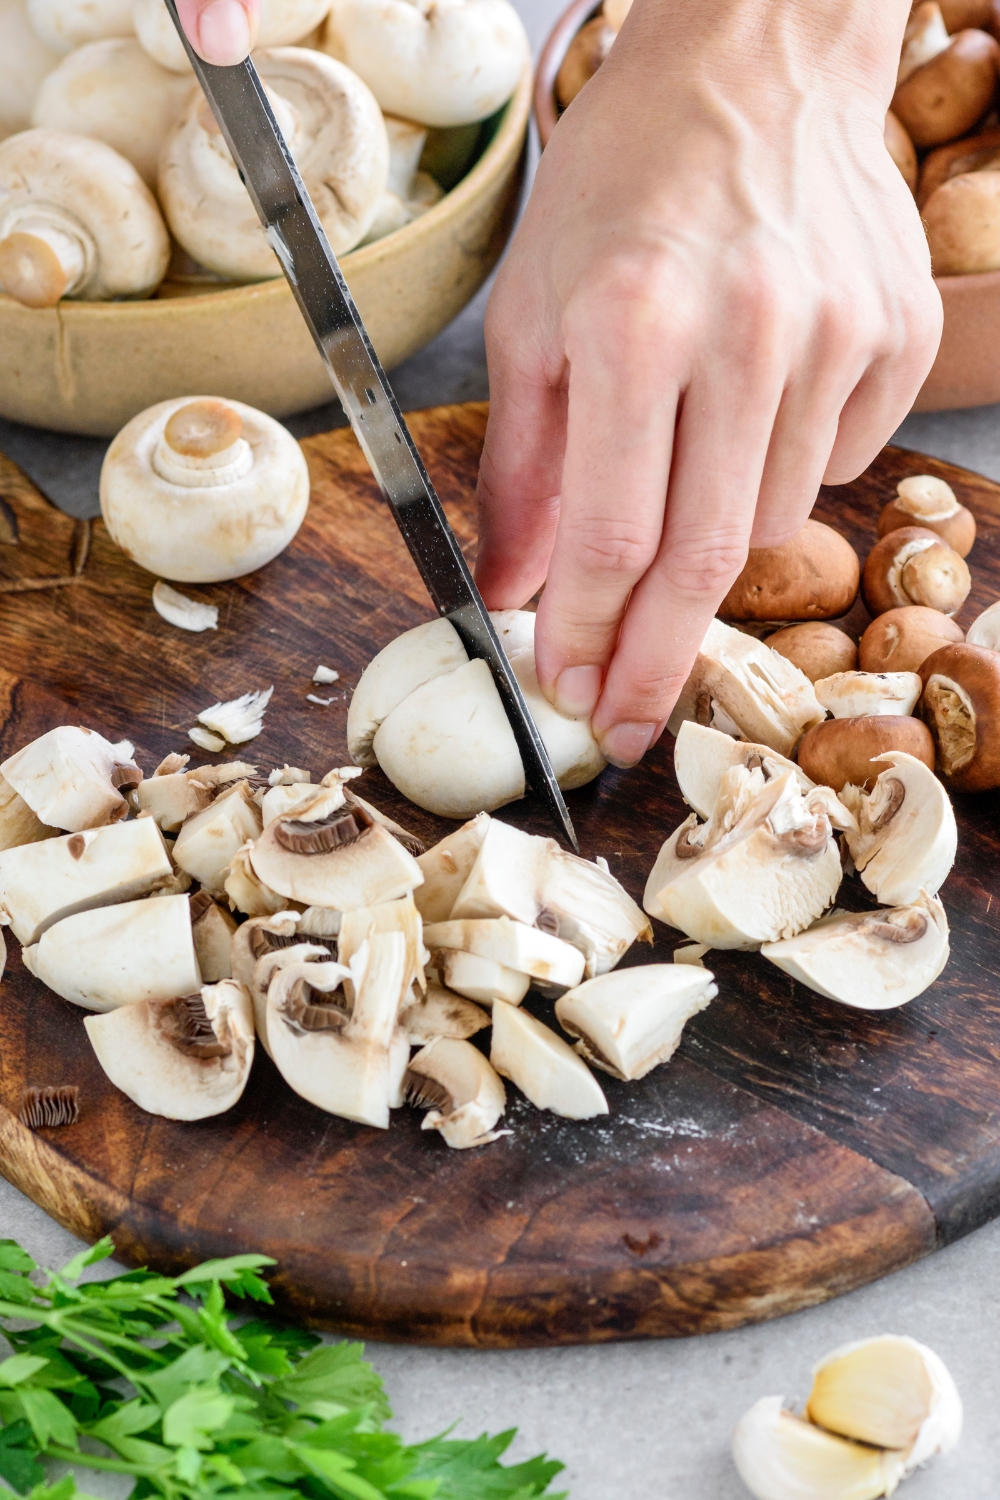 A hand chopping a mushroom into four pieces. The mushroom is on a cutting board surrounded by sliced mushrooms.